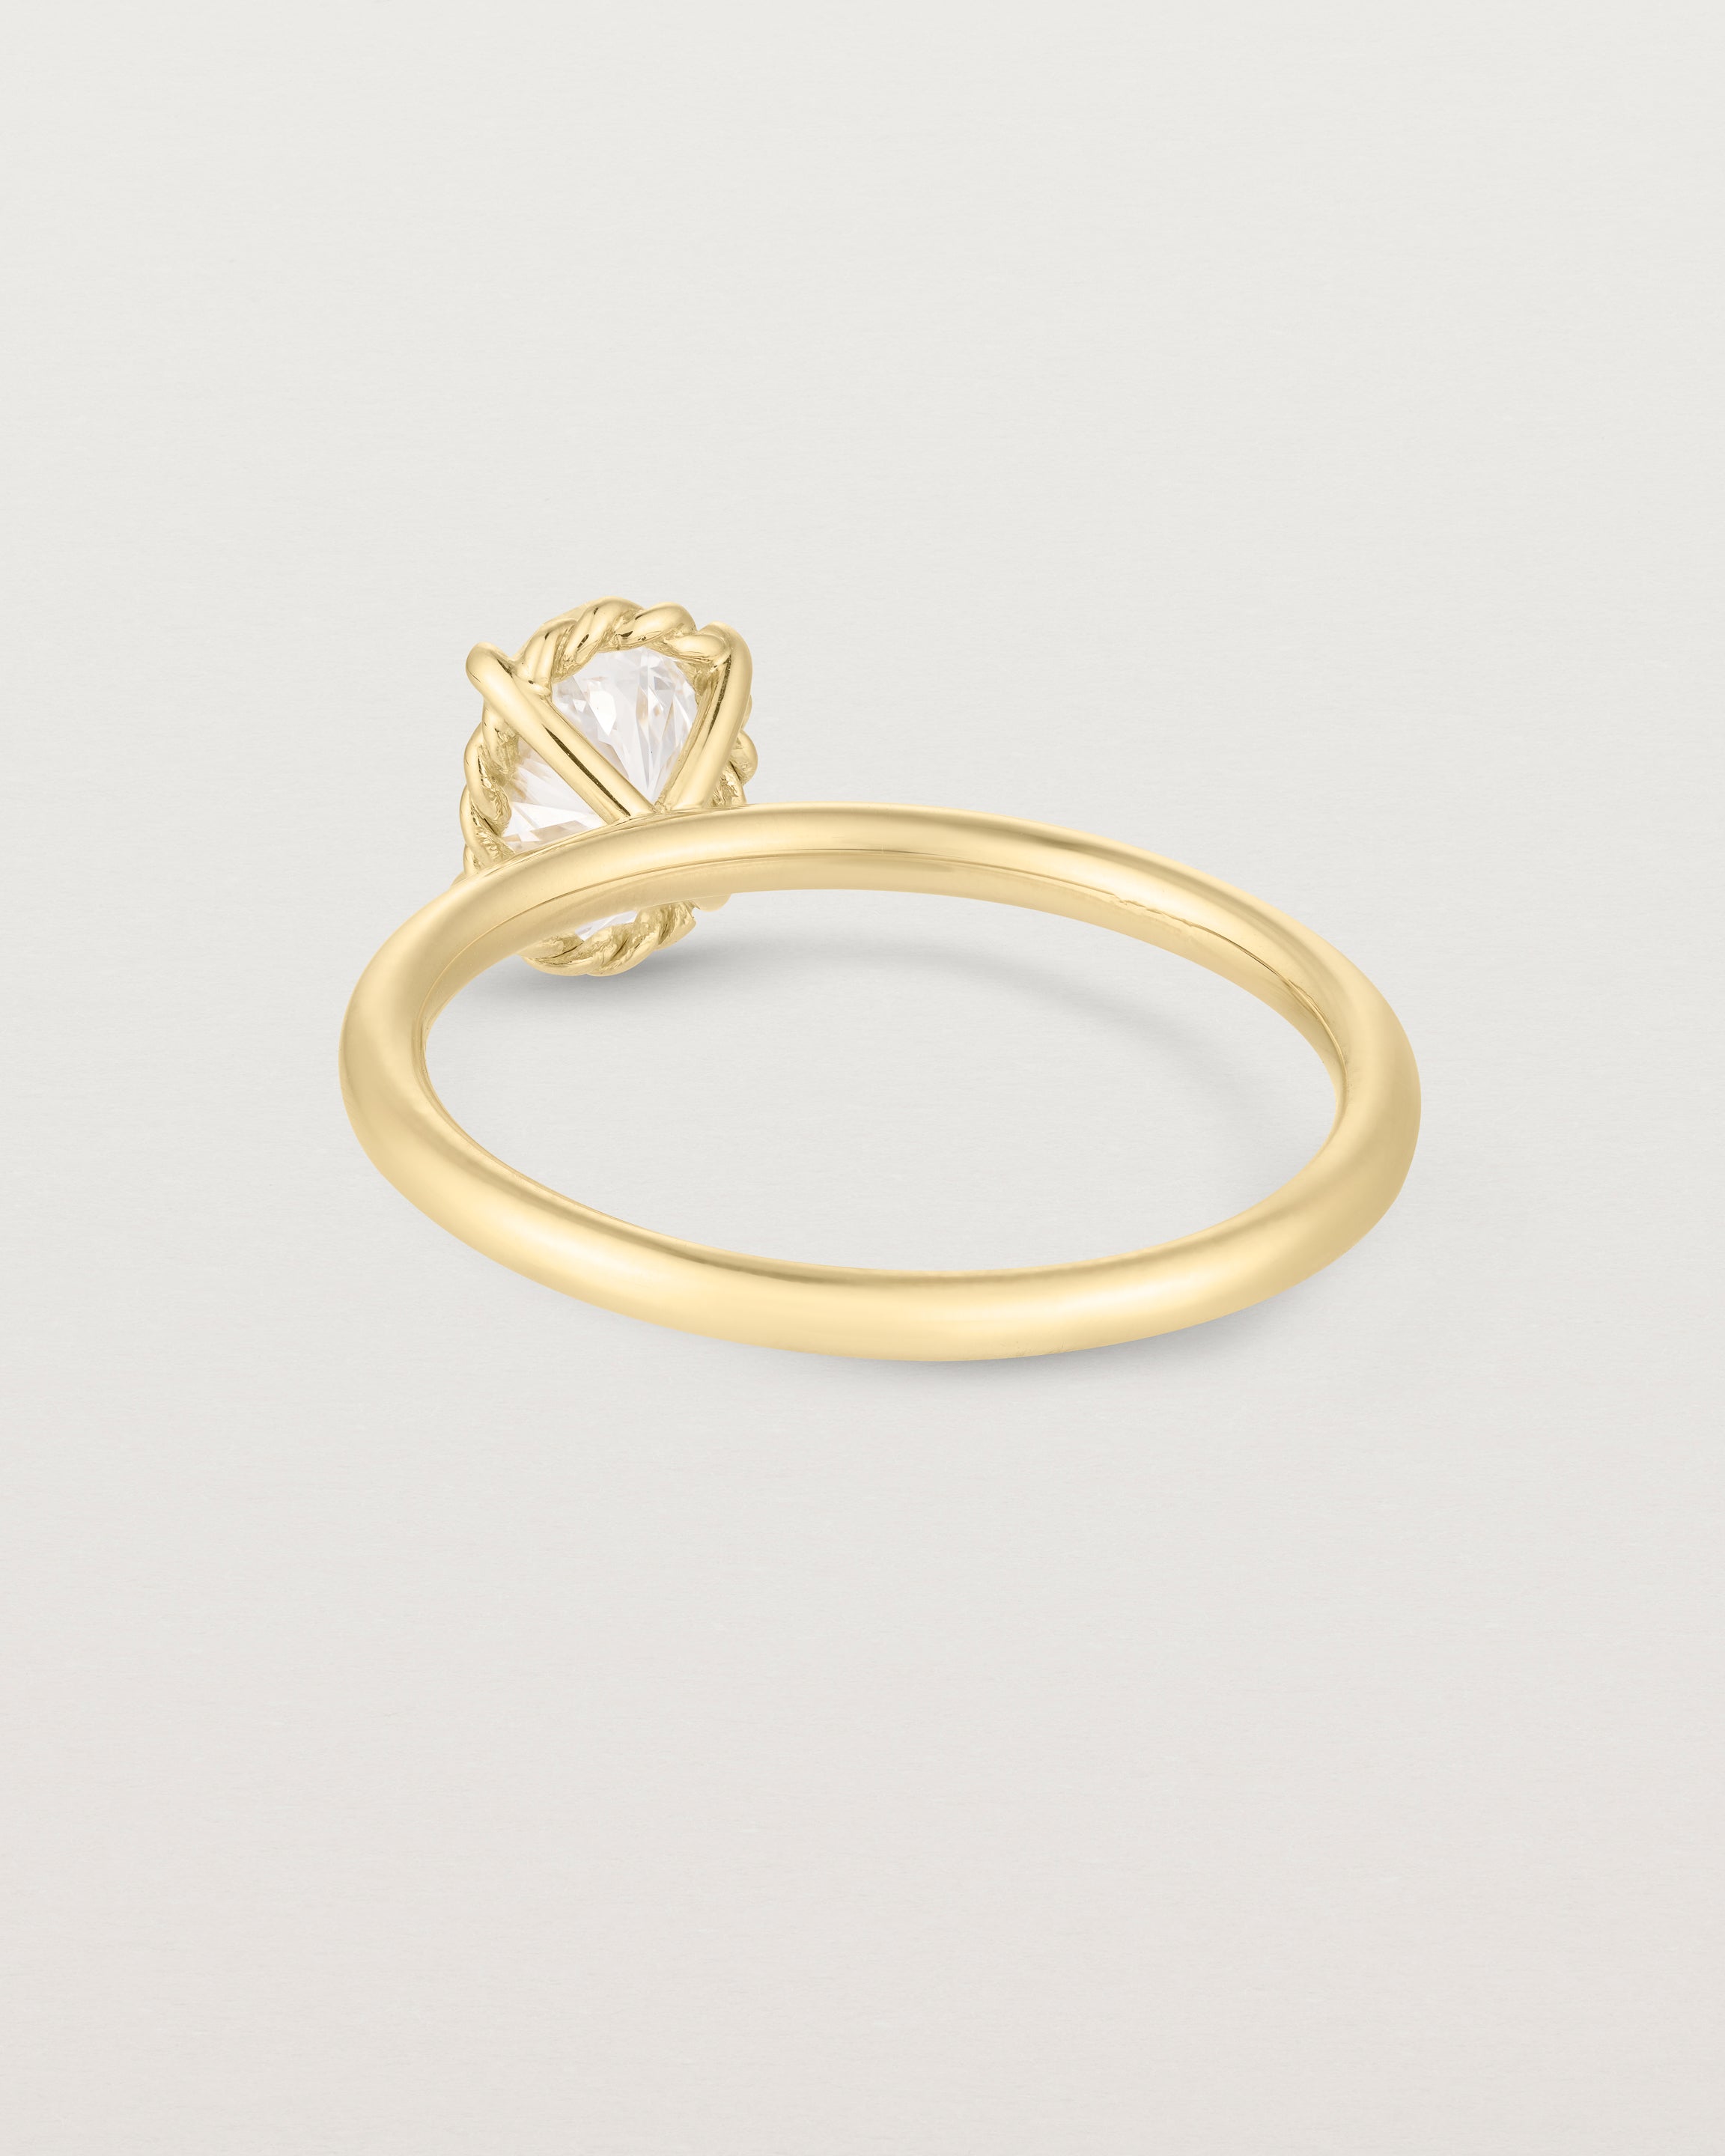 Back image of yellow gold oval diamond solitaire